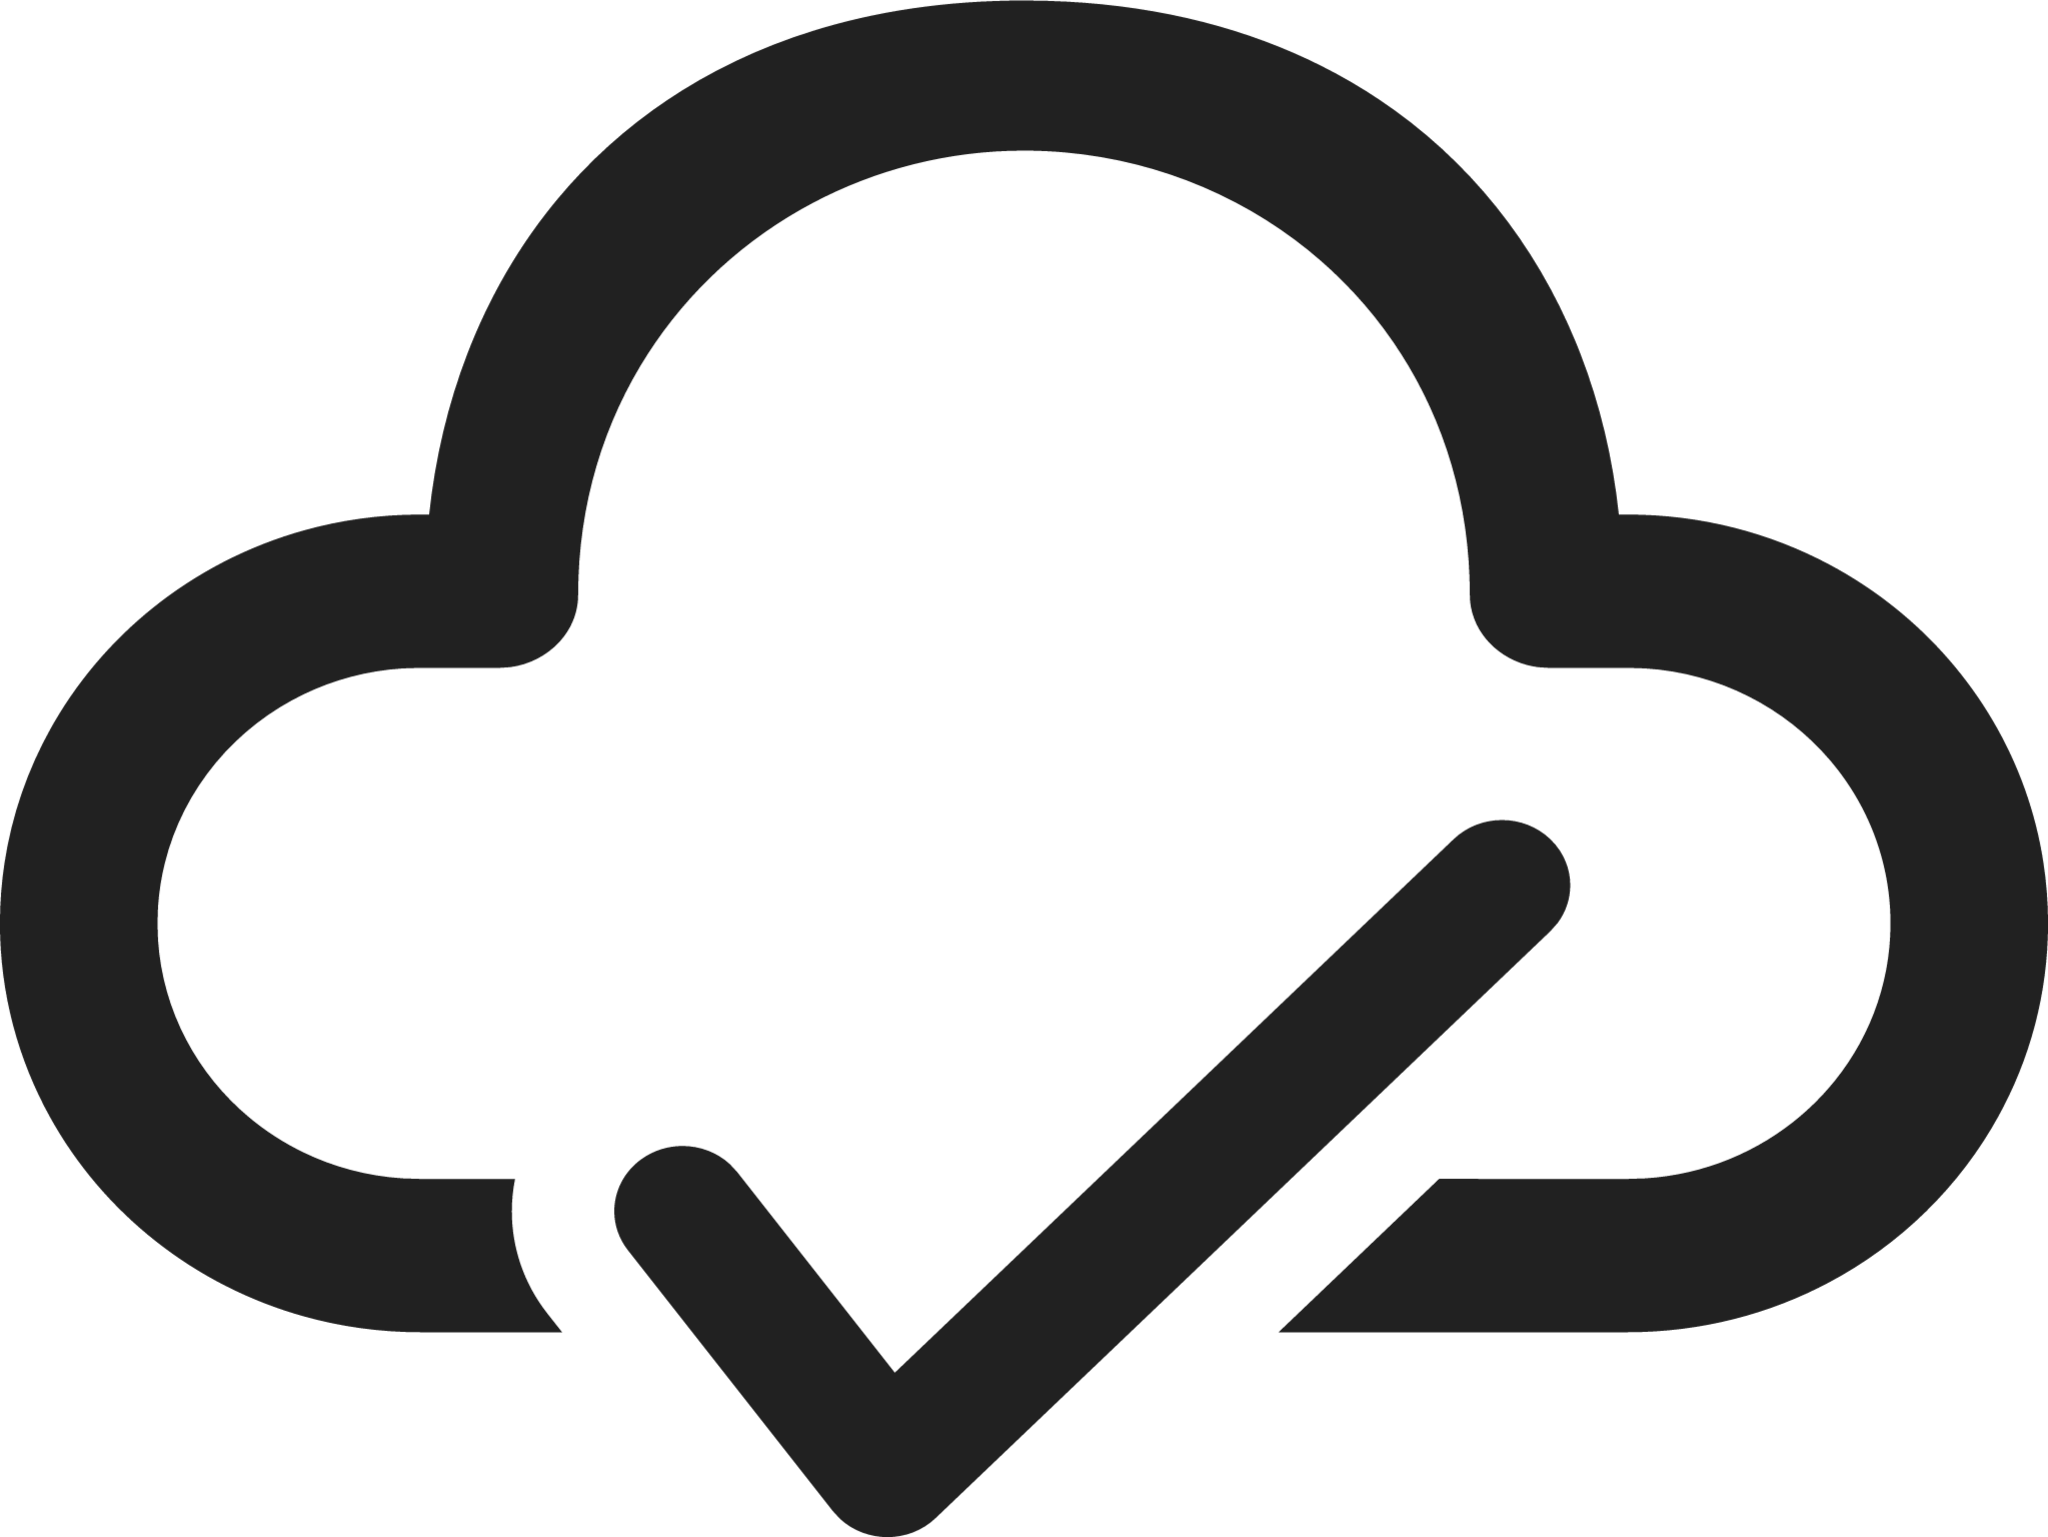 Cloud Sync Complete icon